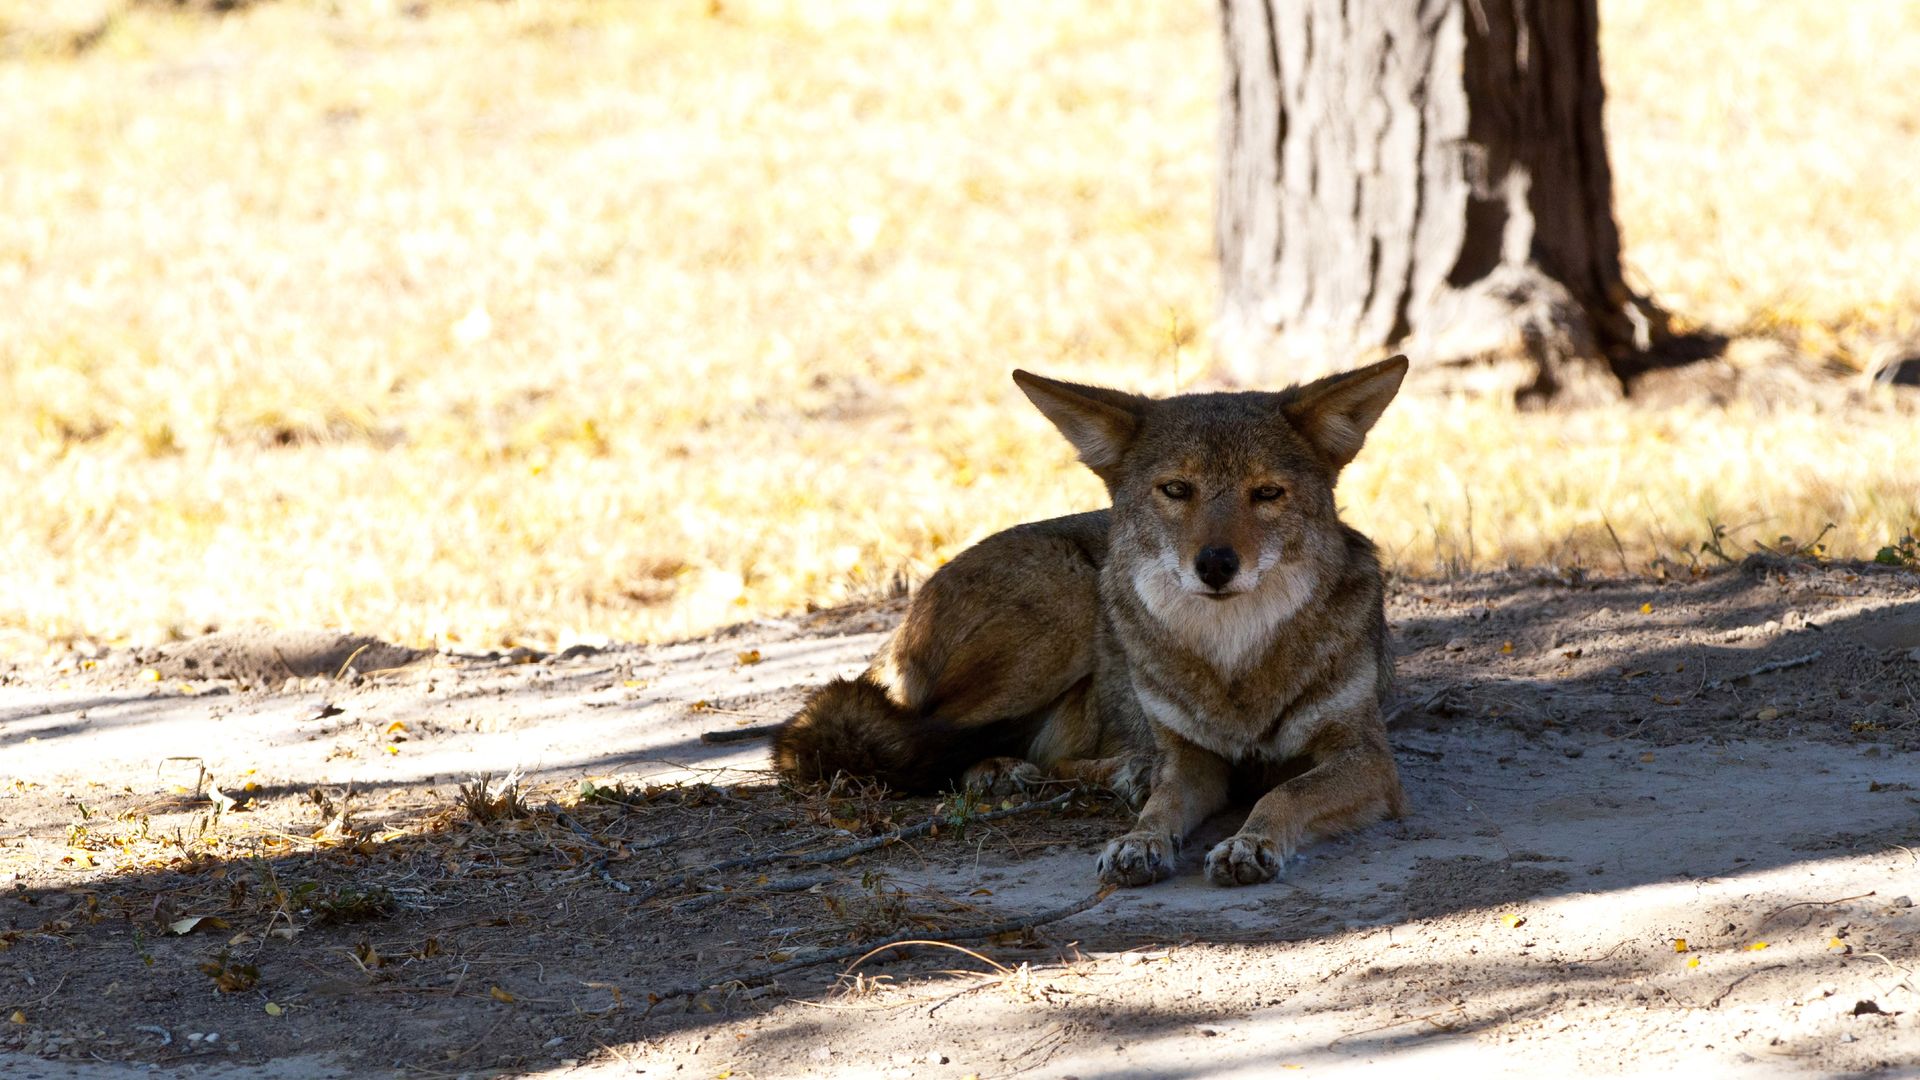 A coyote resting in the shade of a tree